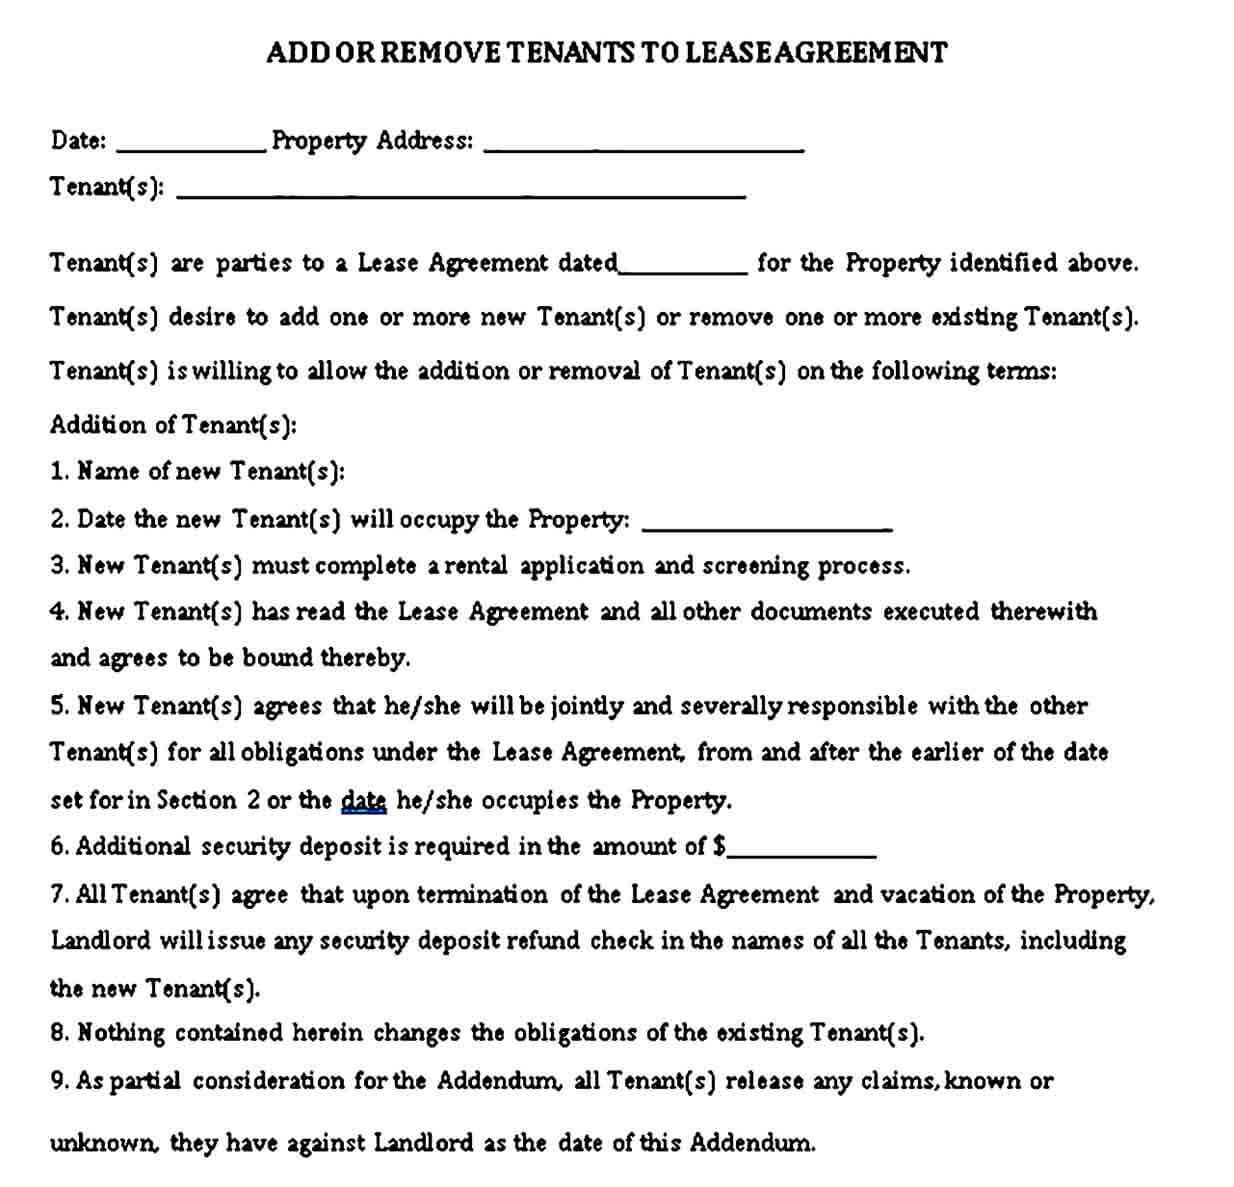 Add or Remove Tenants to Lease Agreement